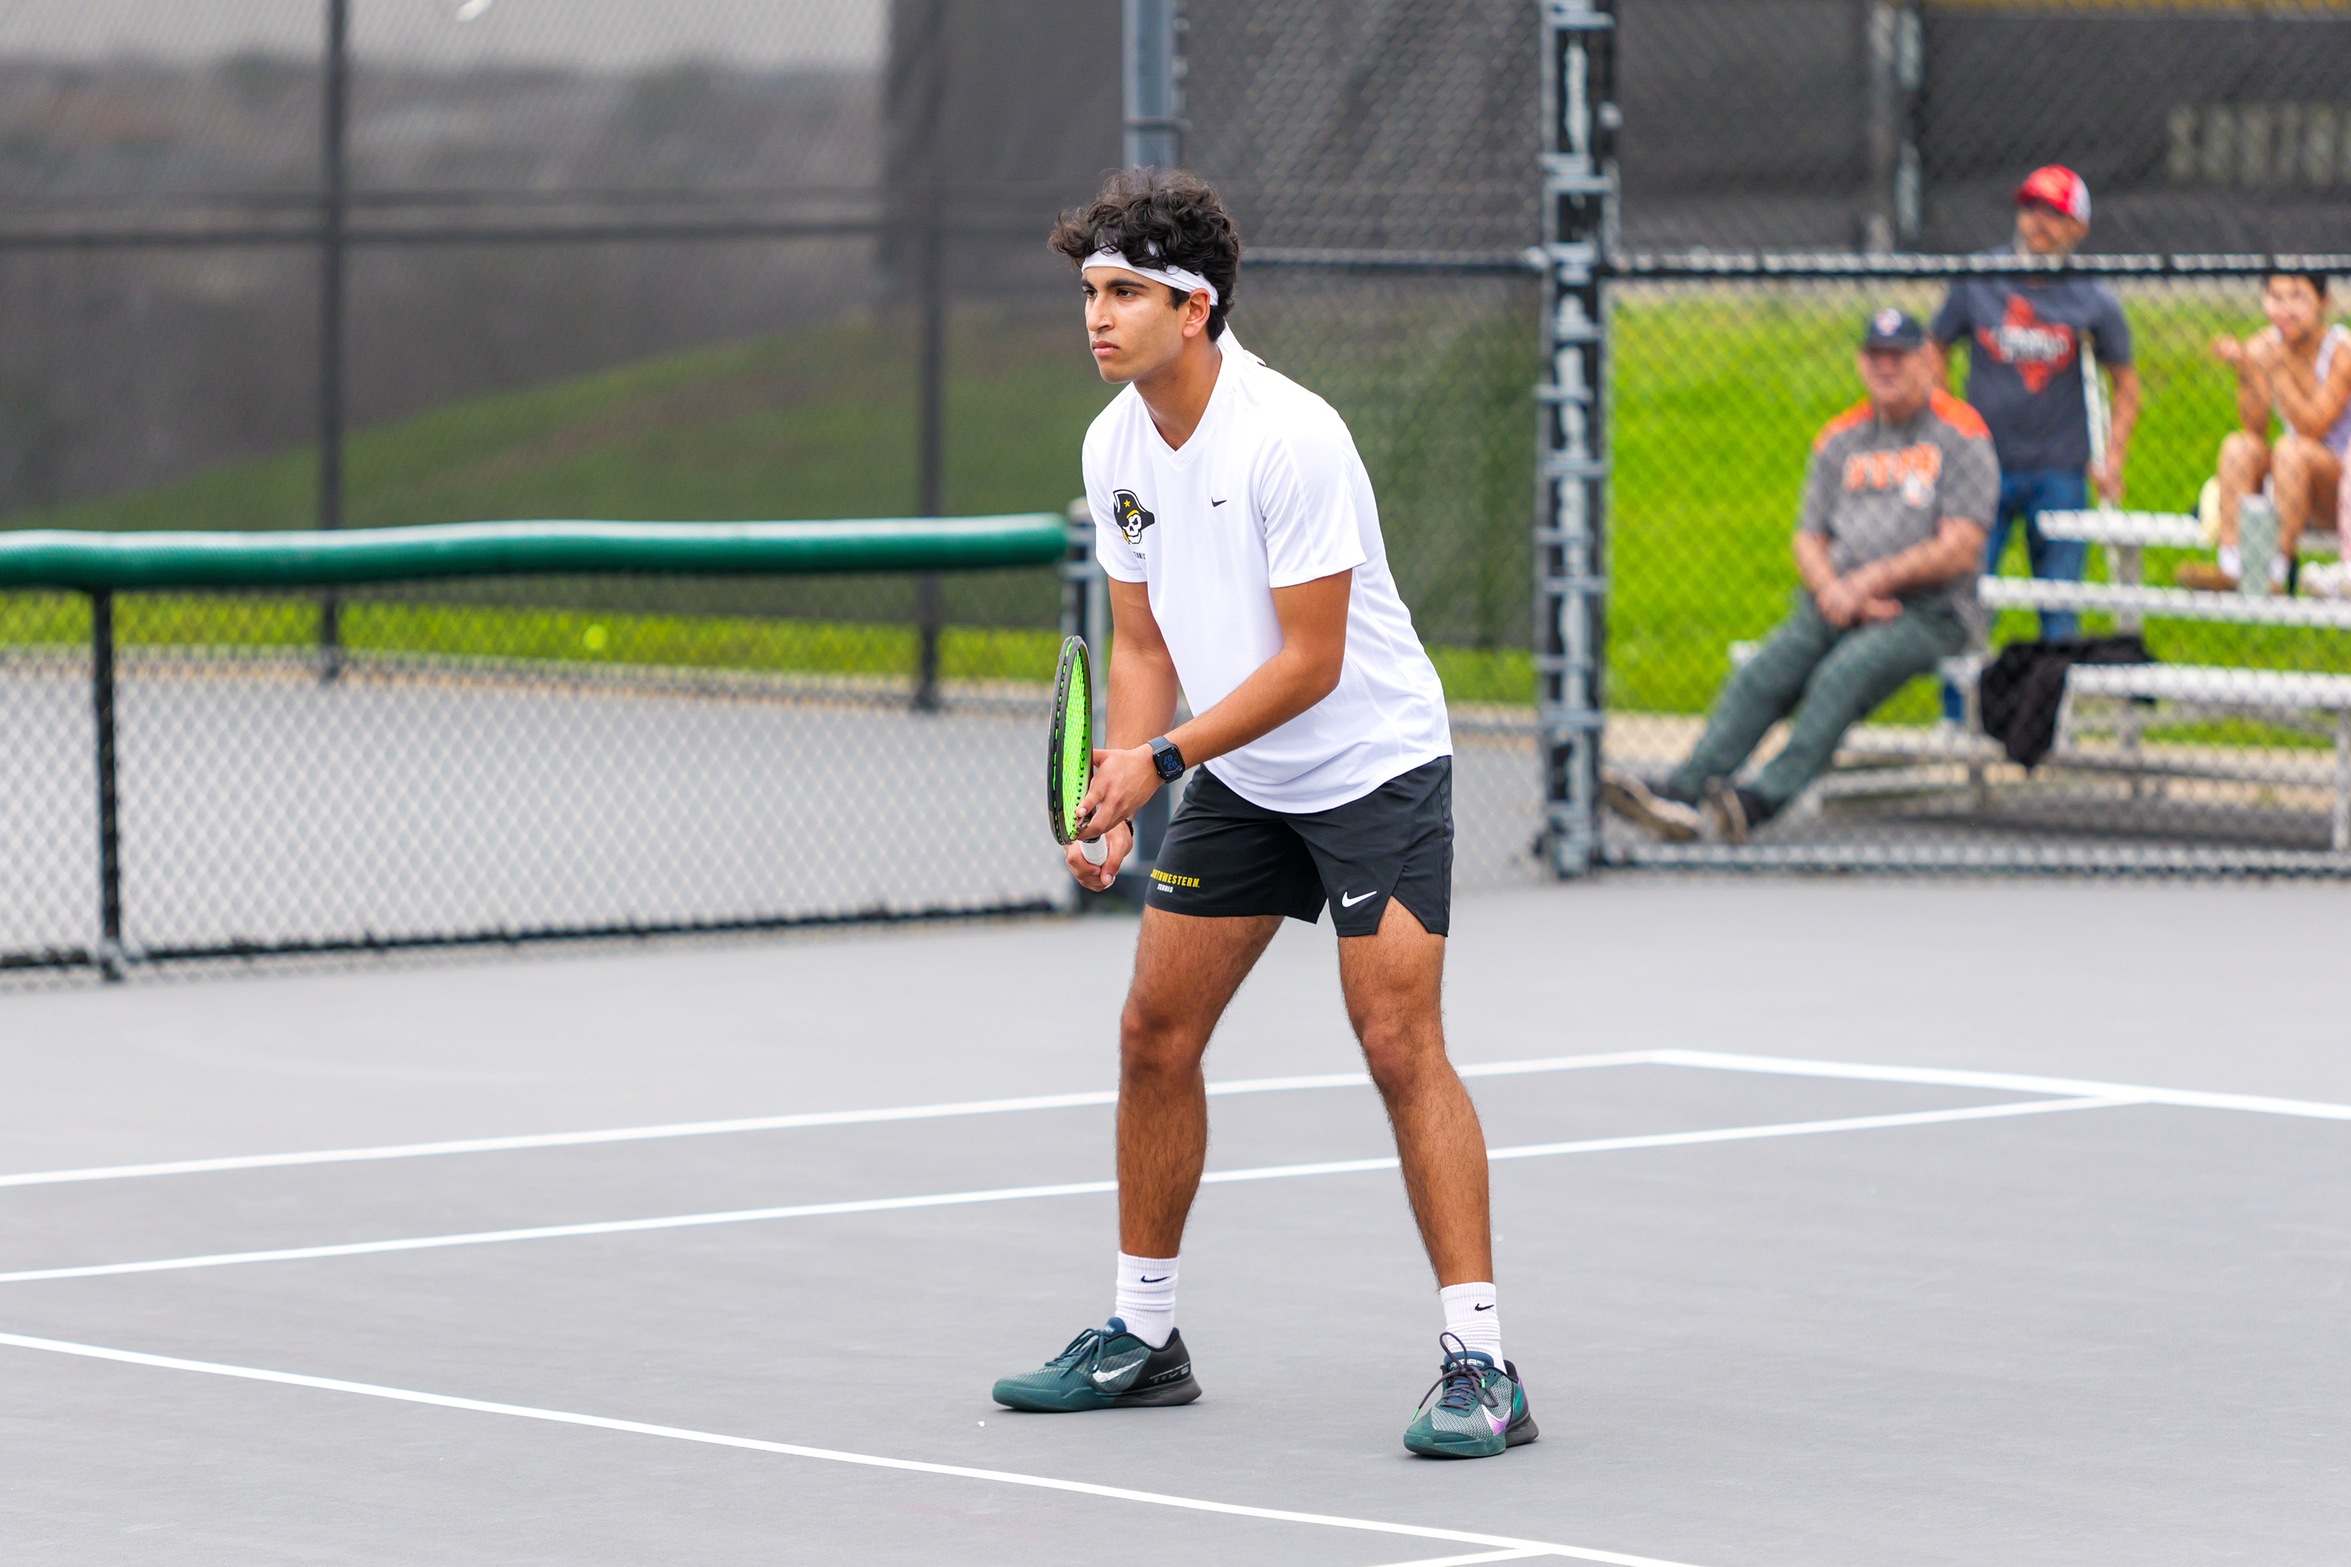 Swarthmore College Hands Men's Tennis Their First Loss